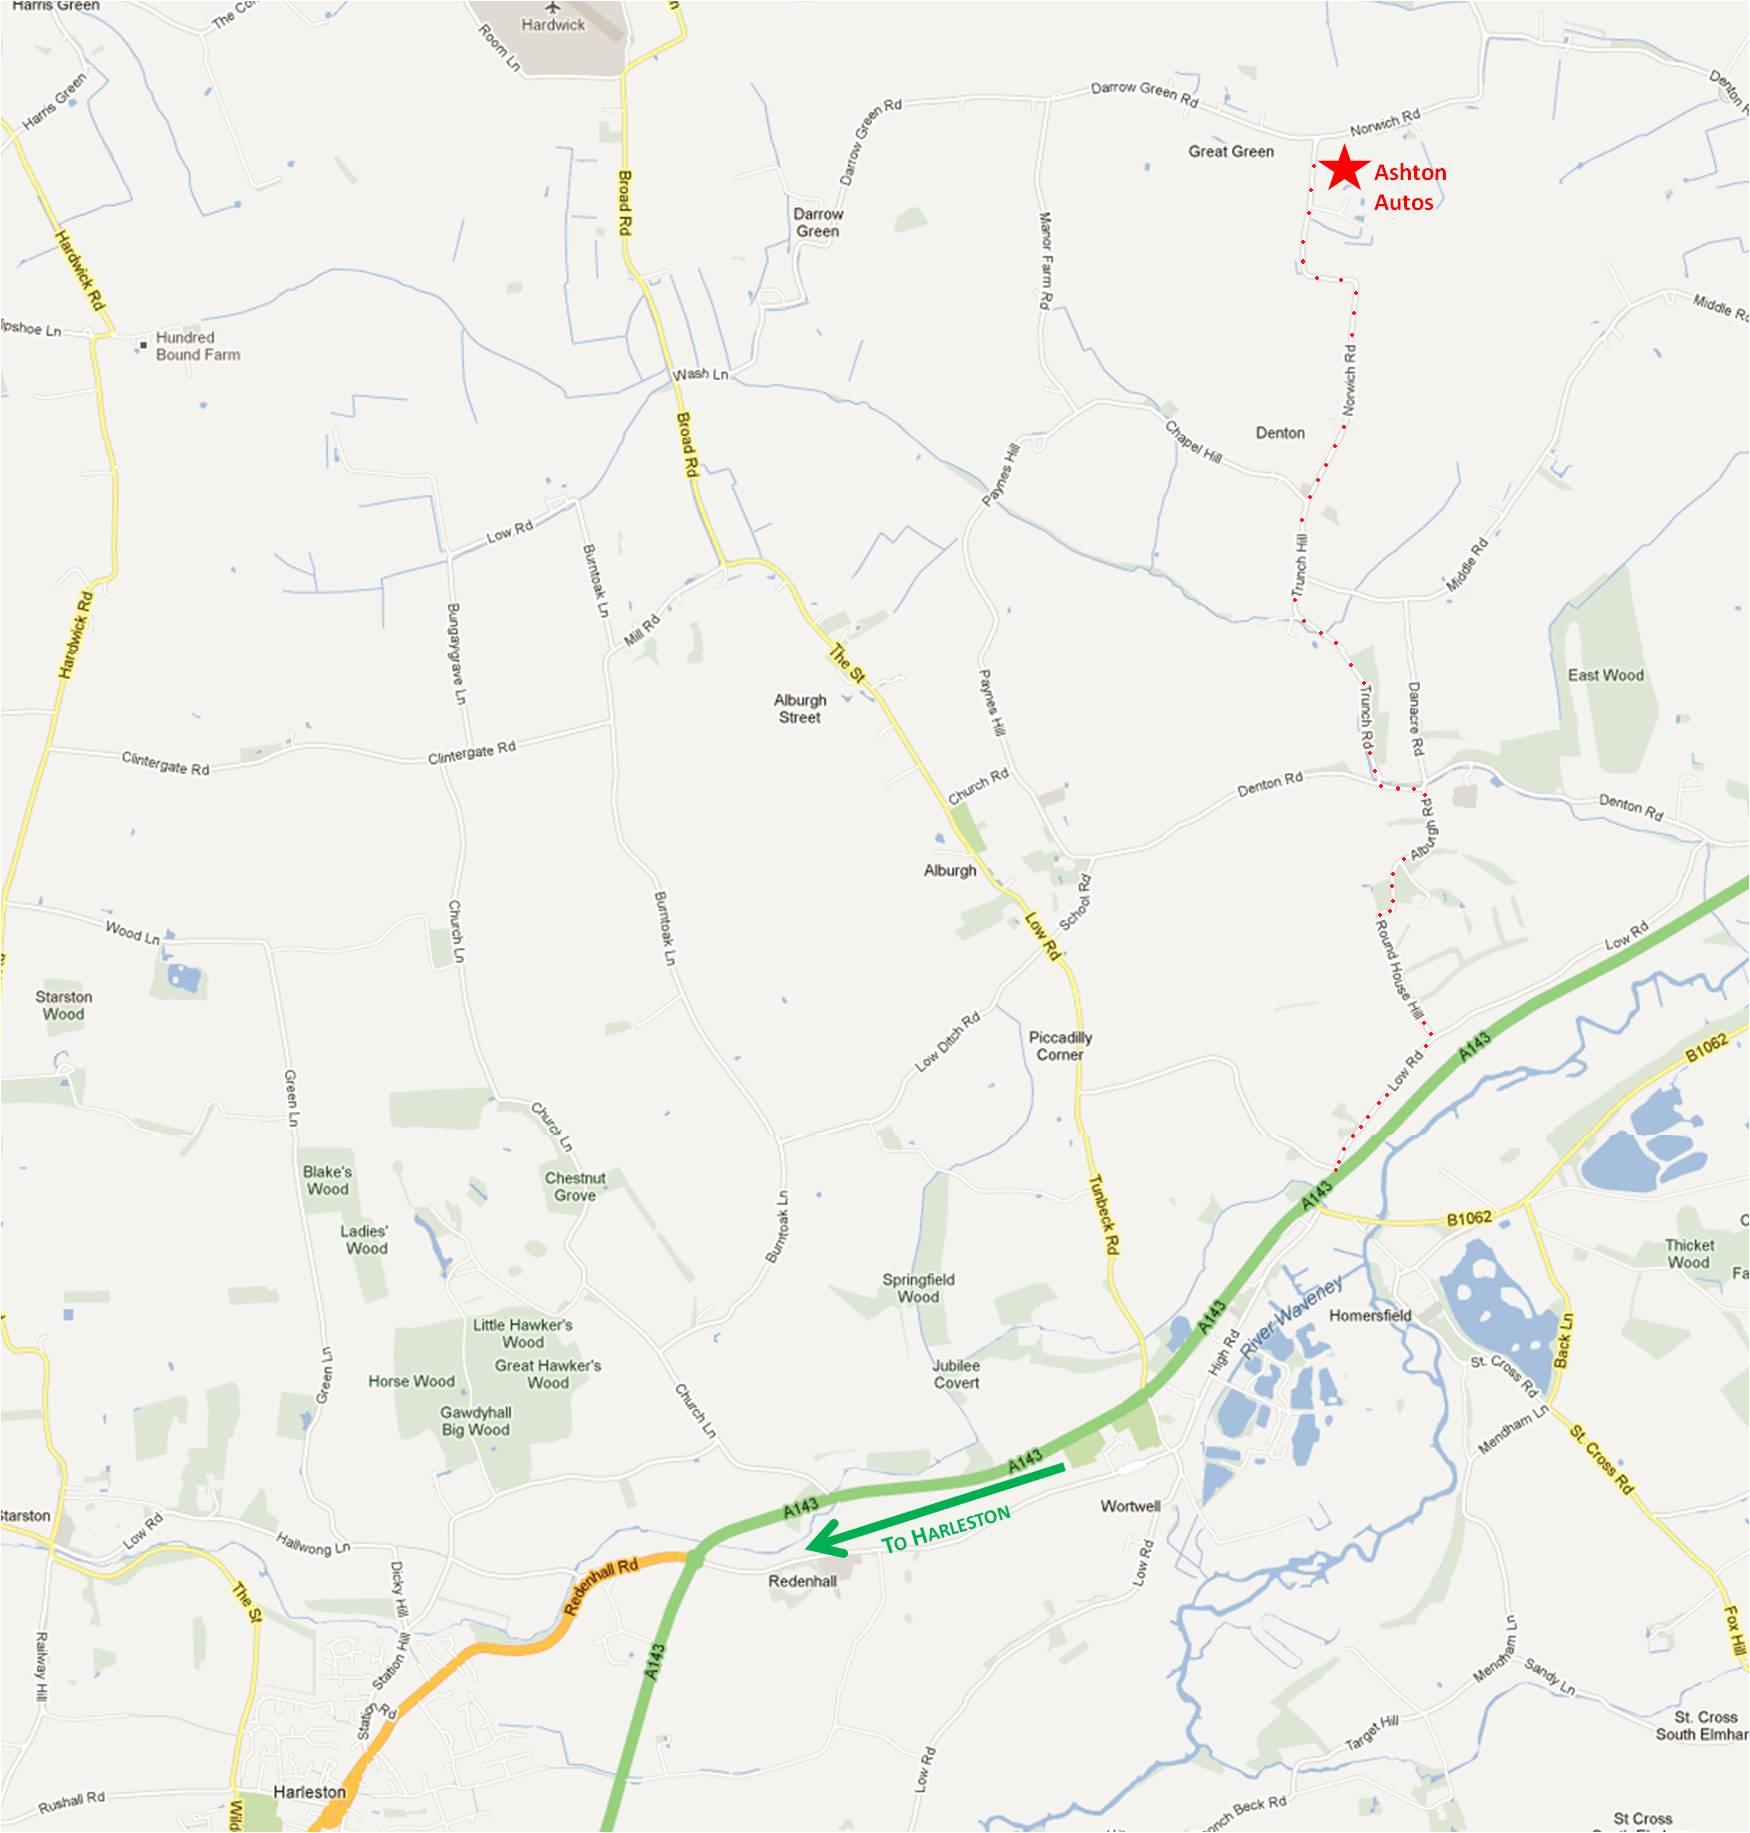 Annotated map showing the route from the A143 (coming from Harleston)